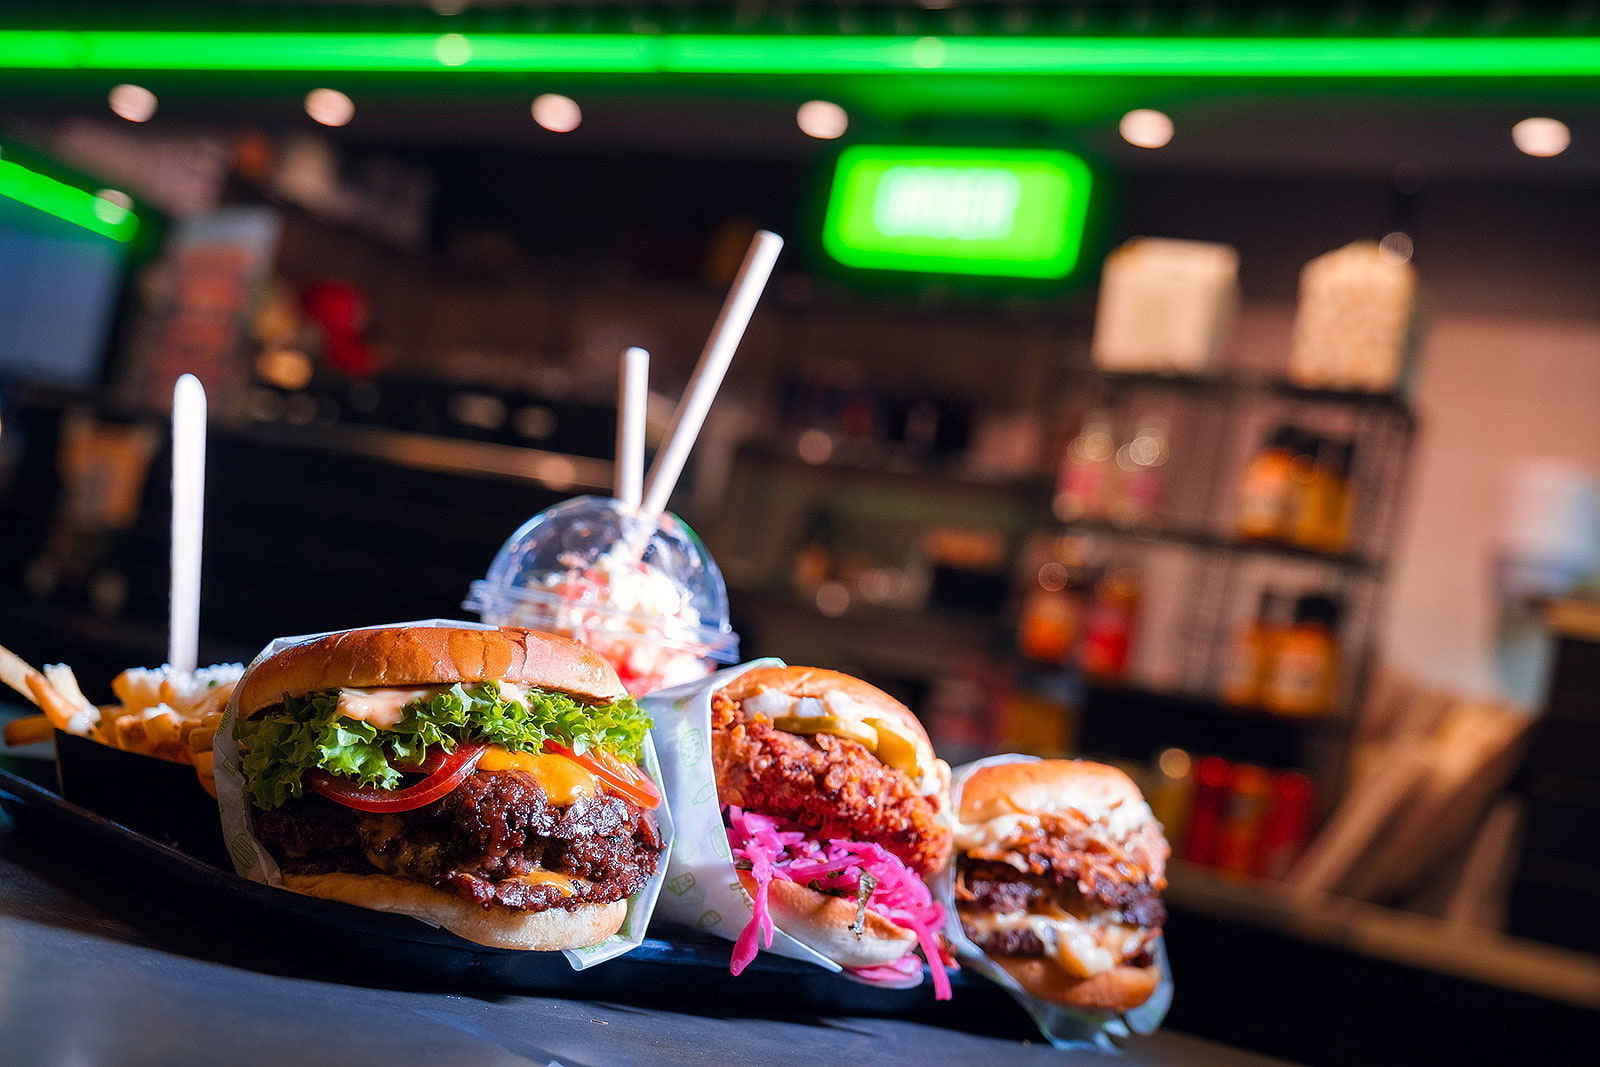 The best halal burgers in London